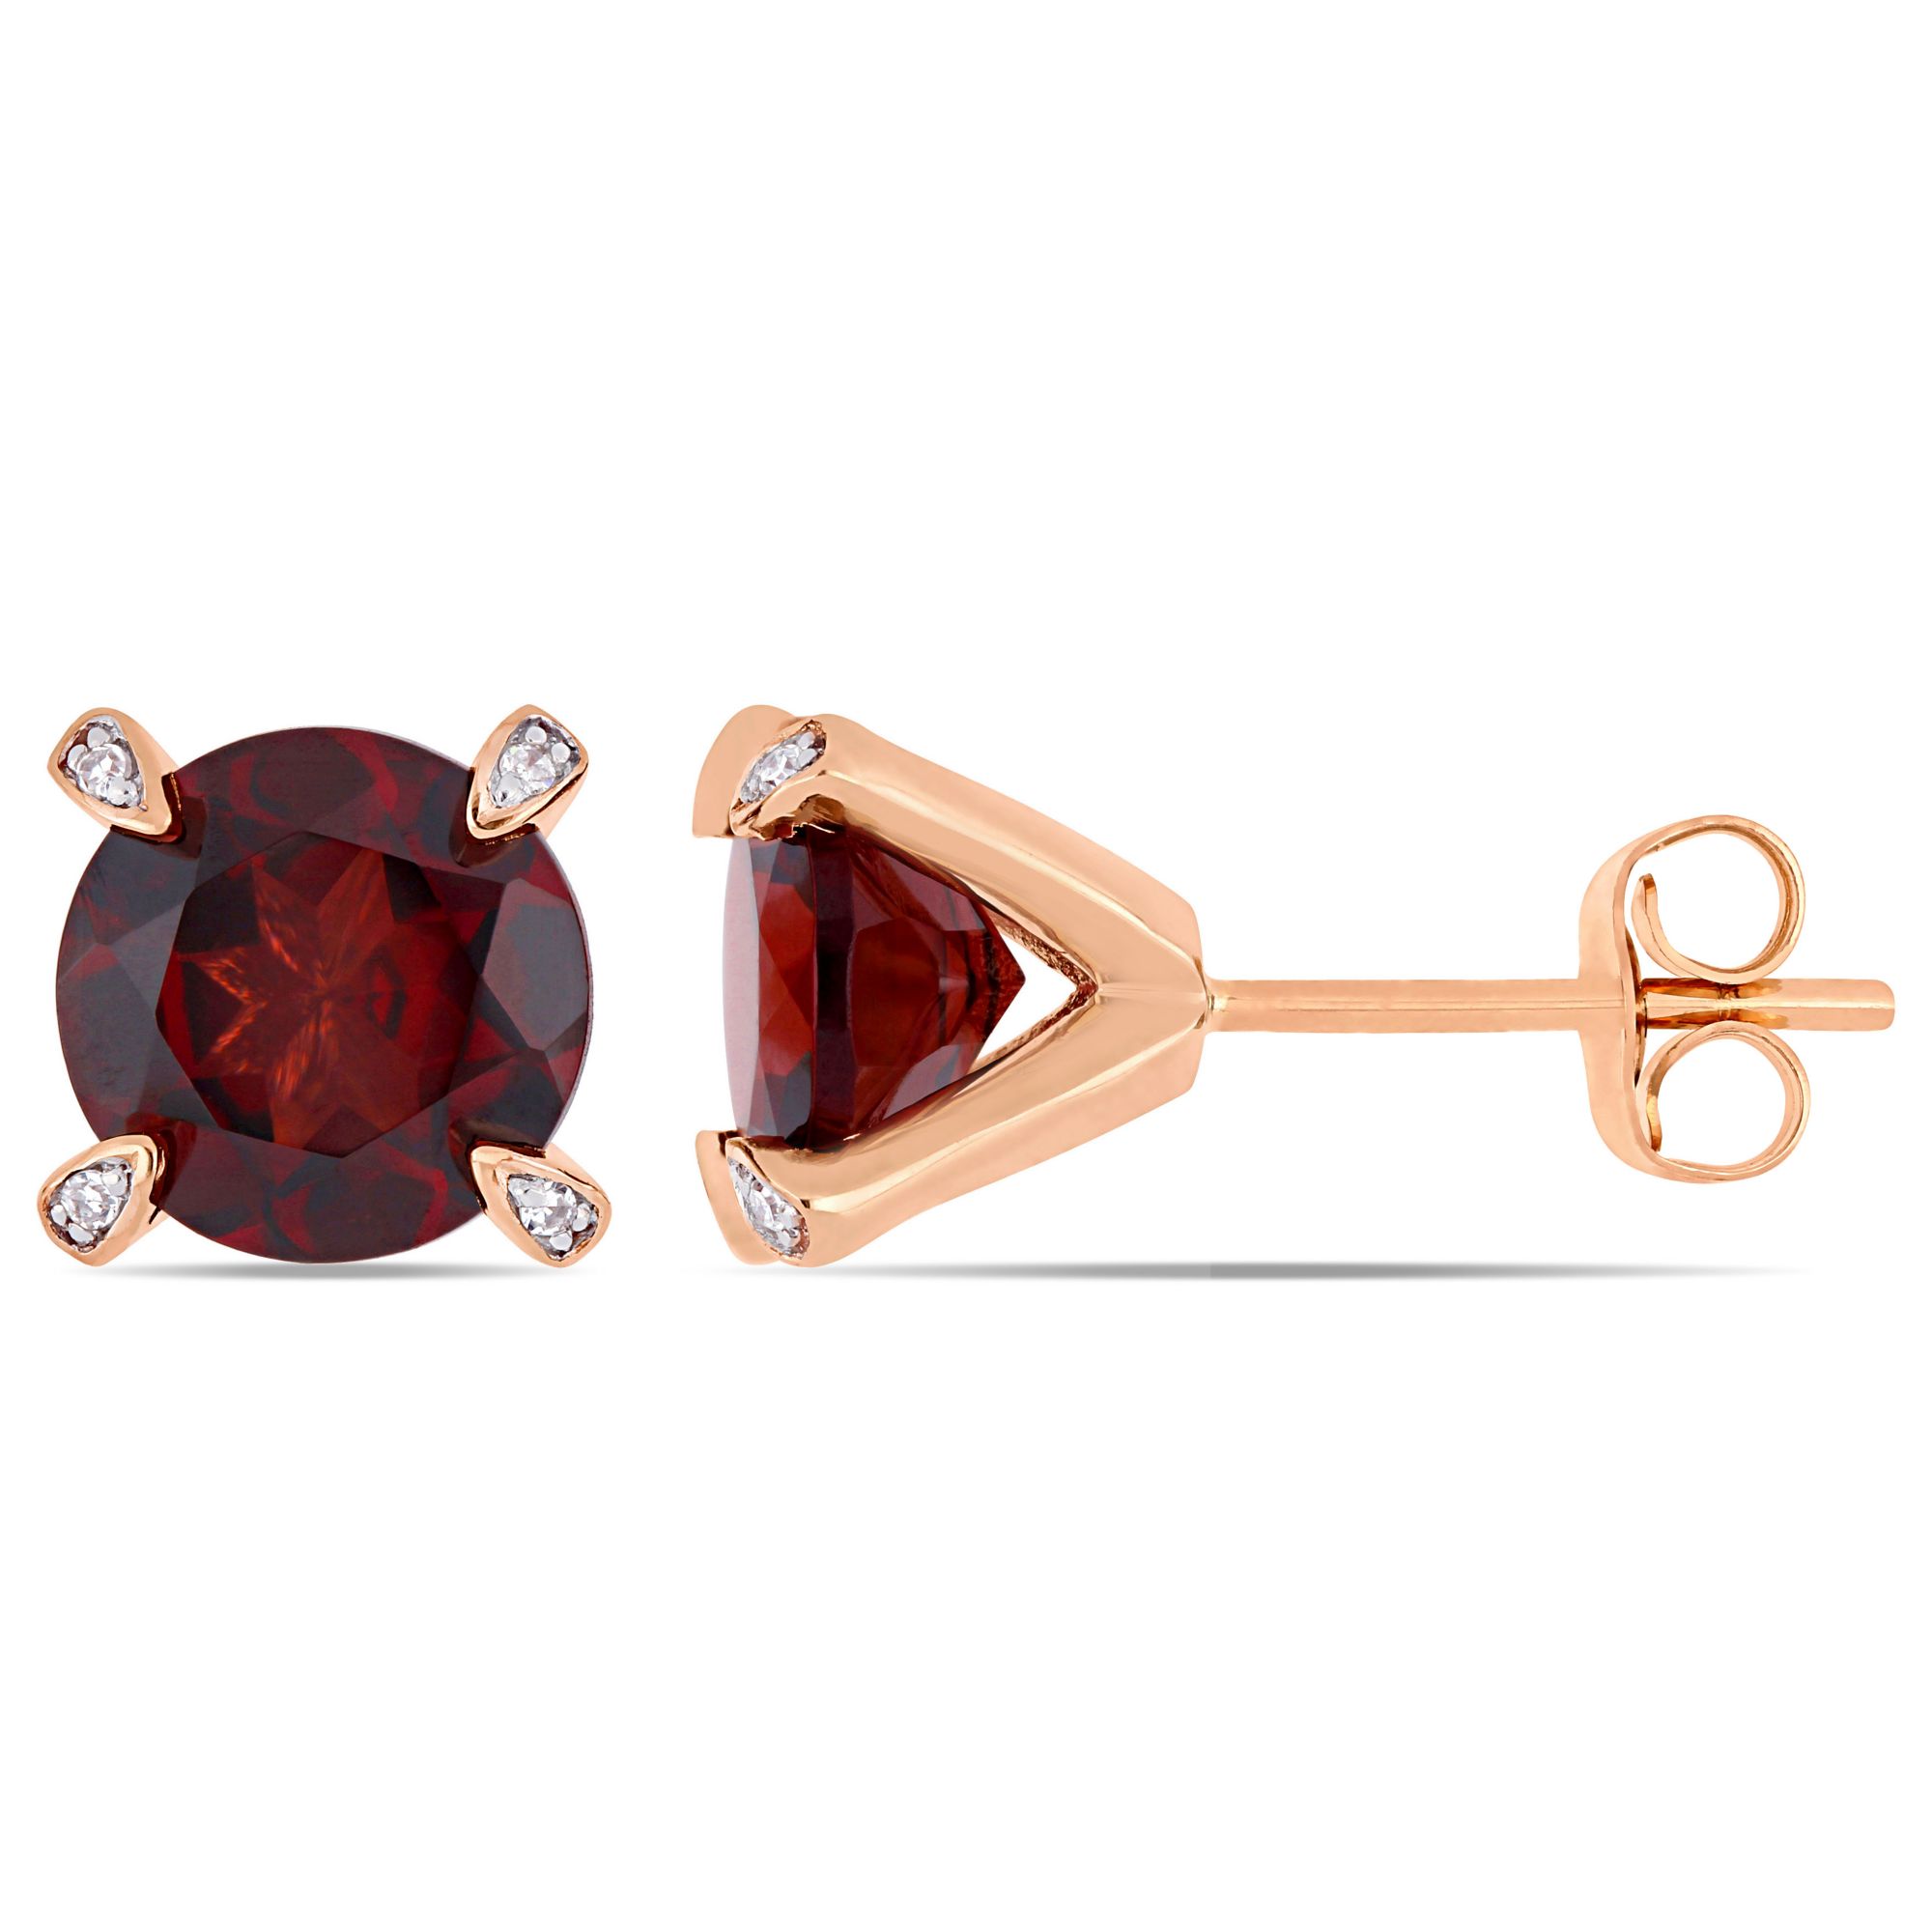 4 ct. TGW Garnet Martini Stud Earrings with Diamond-Accented Prongs in 10k Rose Gold